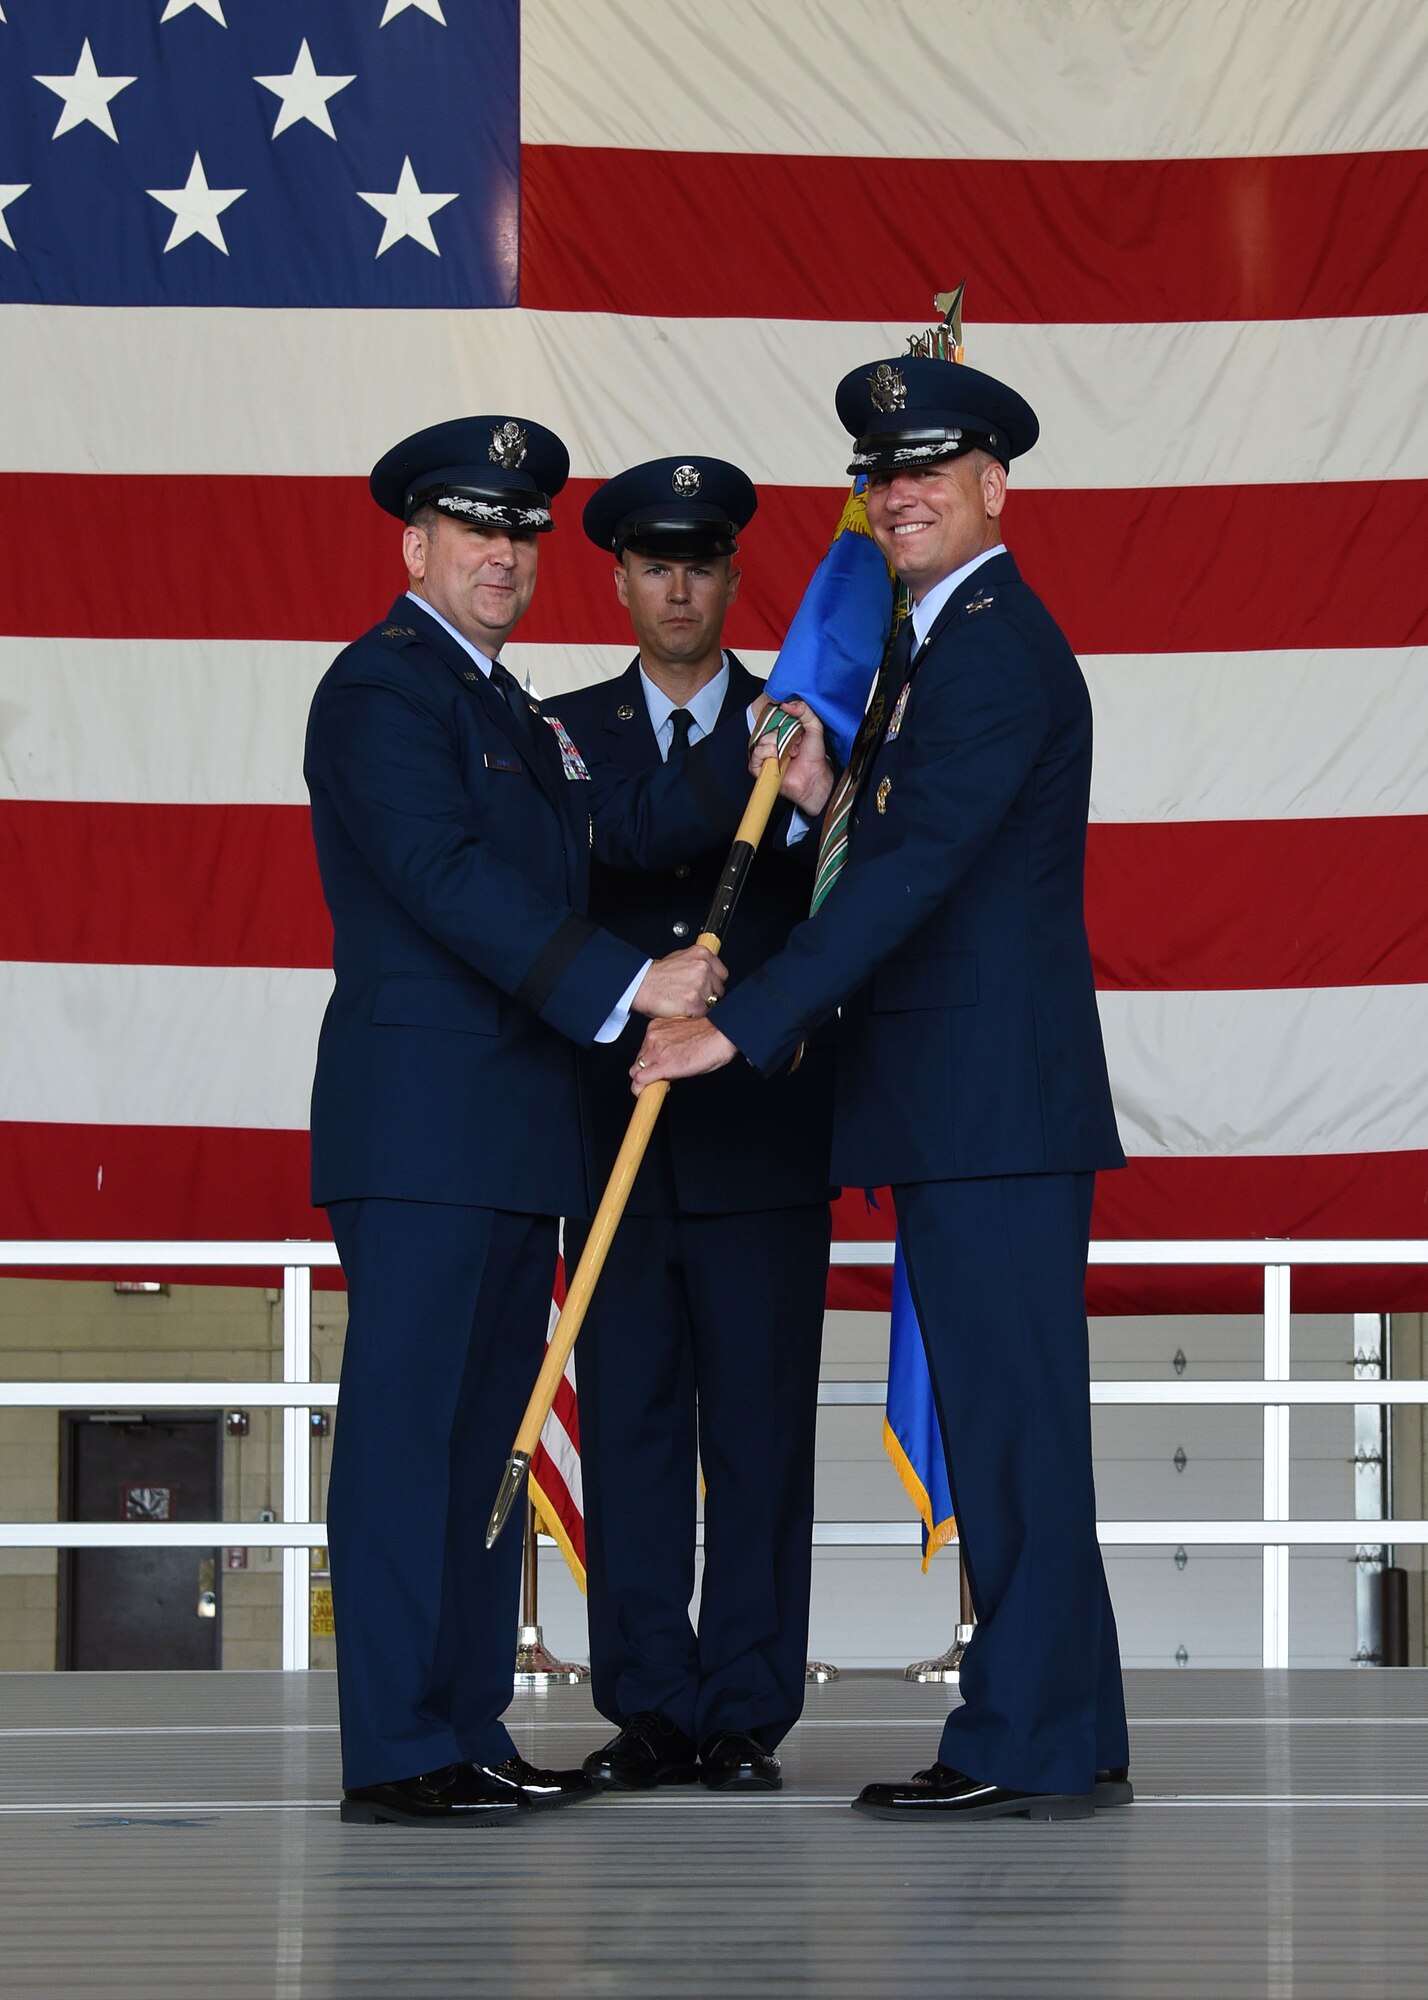 Maj. Gen. Christopher Bence, U.S. Air Force Expeditionary Center commander, left, passes the guidon to the new commander of the 319th Air Base Wing, Col. Benjamin Spencer, right, at an assumption of command ceremony June 6, 2017, on Grand Forks Air Force Base, N.D. Spencer is transitioning from Davis-Monthan Air Force Base, N.M., with his wife, Beth, and son, Evan. (U.S. Air Force photo by Airman 1st Class Elora McCutcheon)